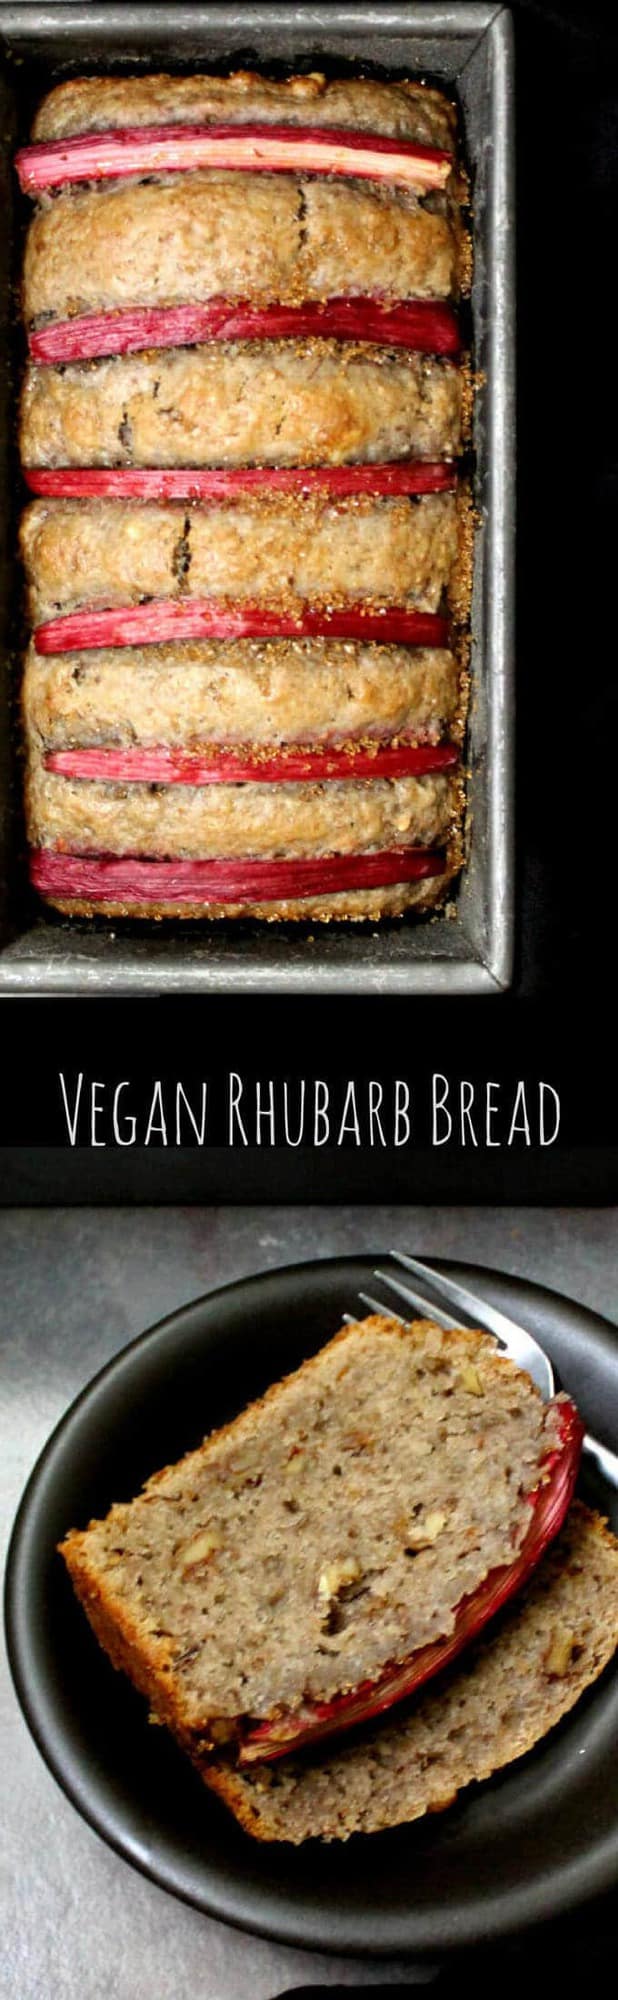 Pin image of vegan rhubarb bread and its slices with inlay that reads "vegan rhubarb bread"